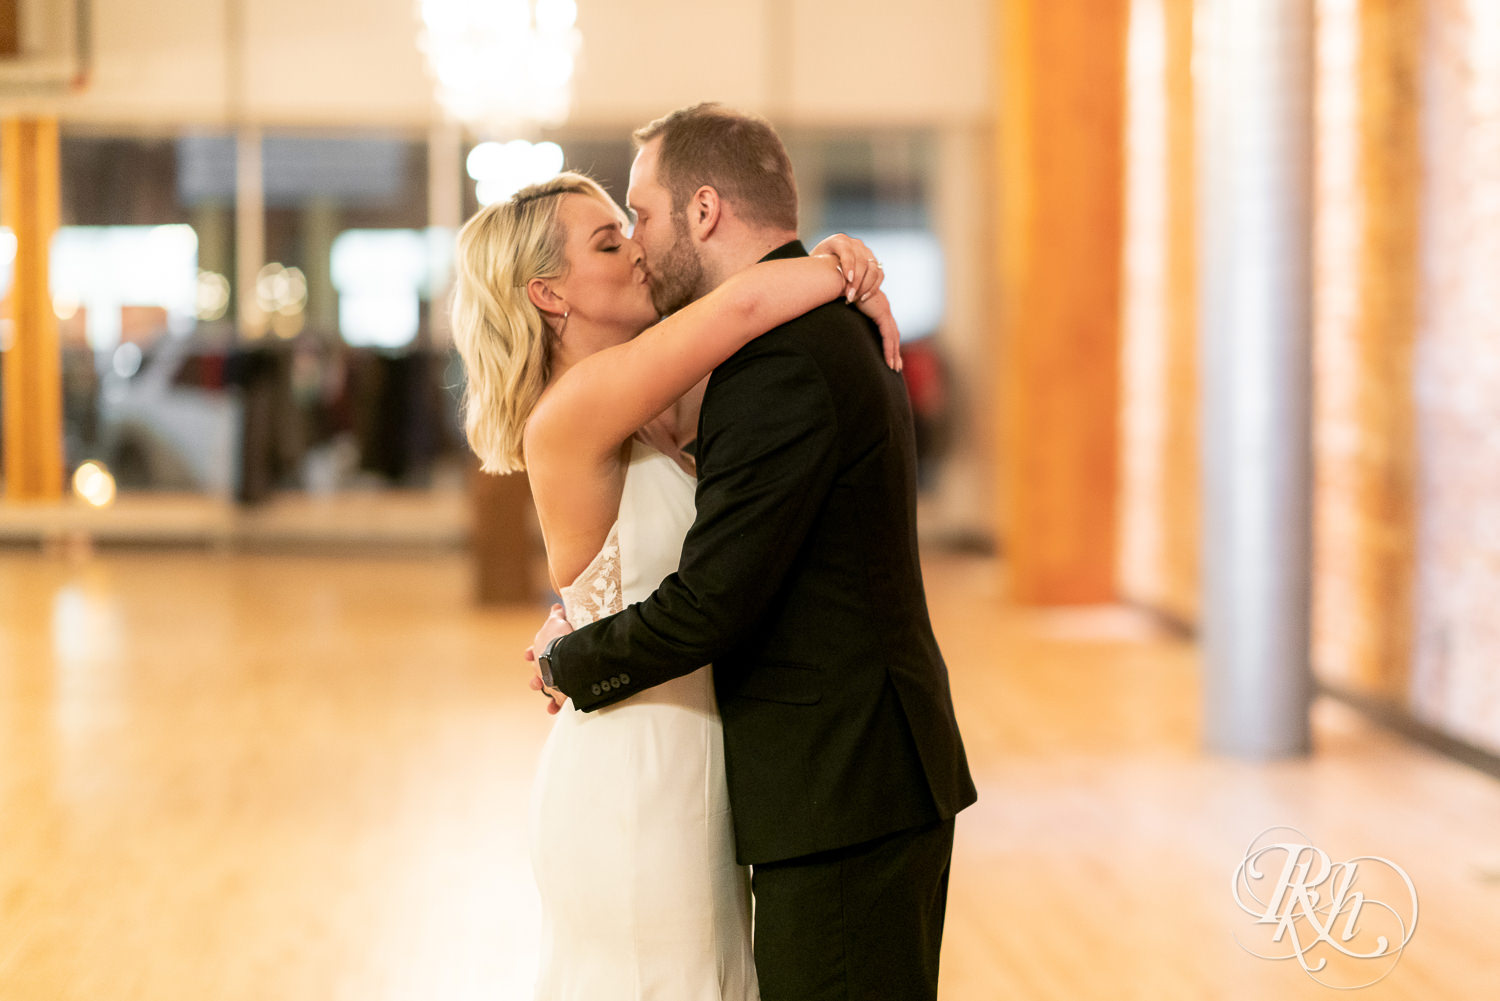 Bride and groom share first dance in 3 Ten Event Venue in Faribault, Minnesota.